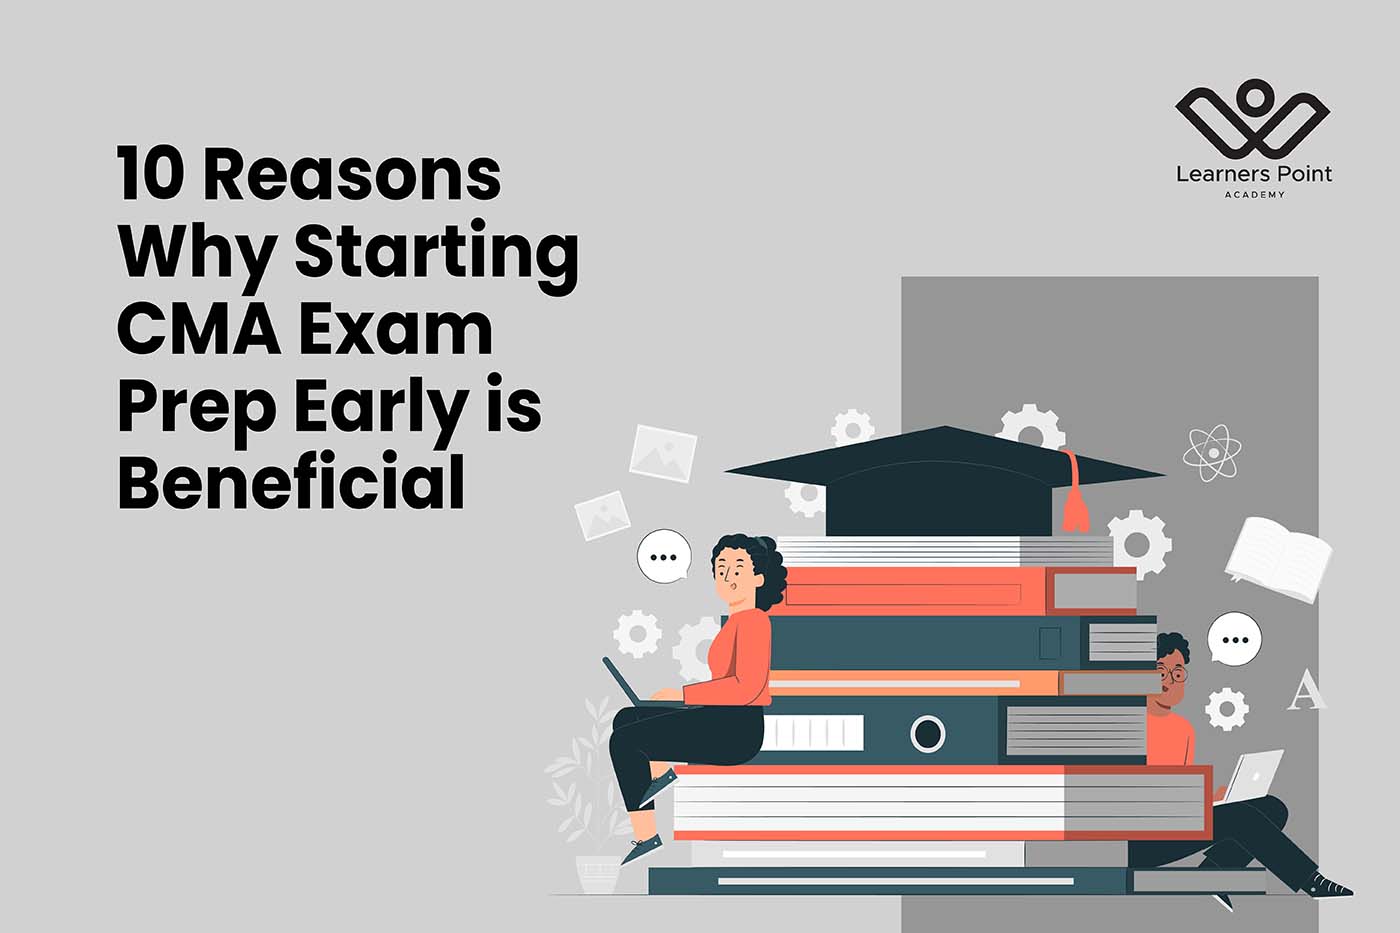 10 Reasons Why Starting CMA Exam Prep Early is Beneficial